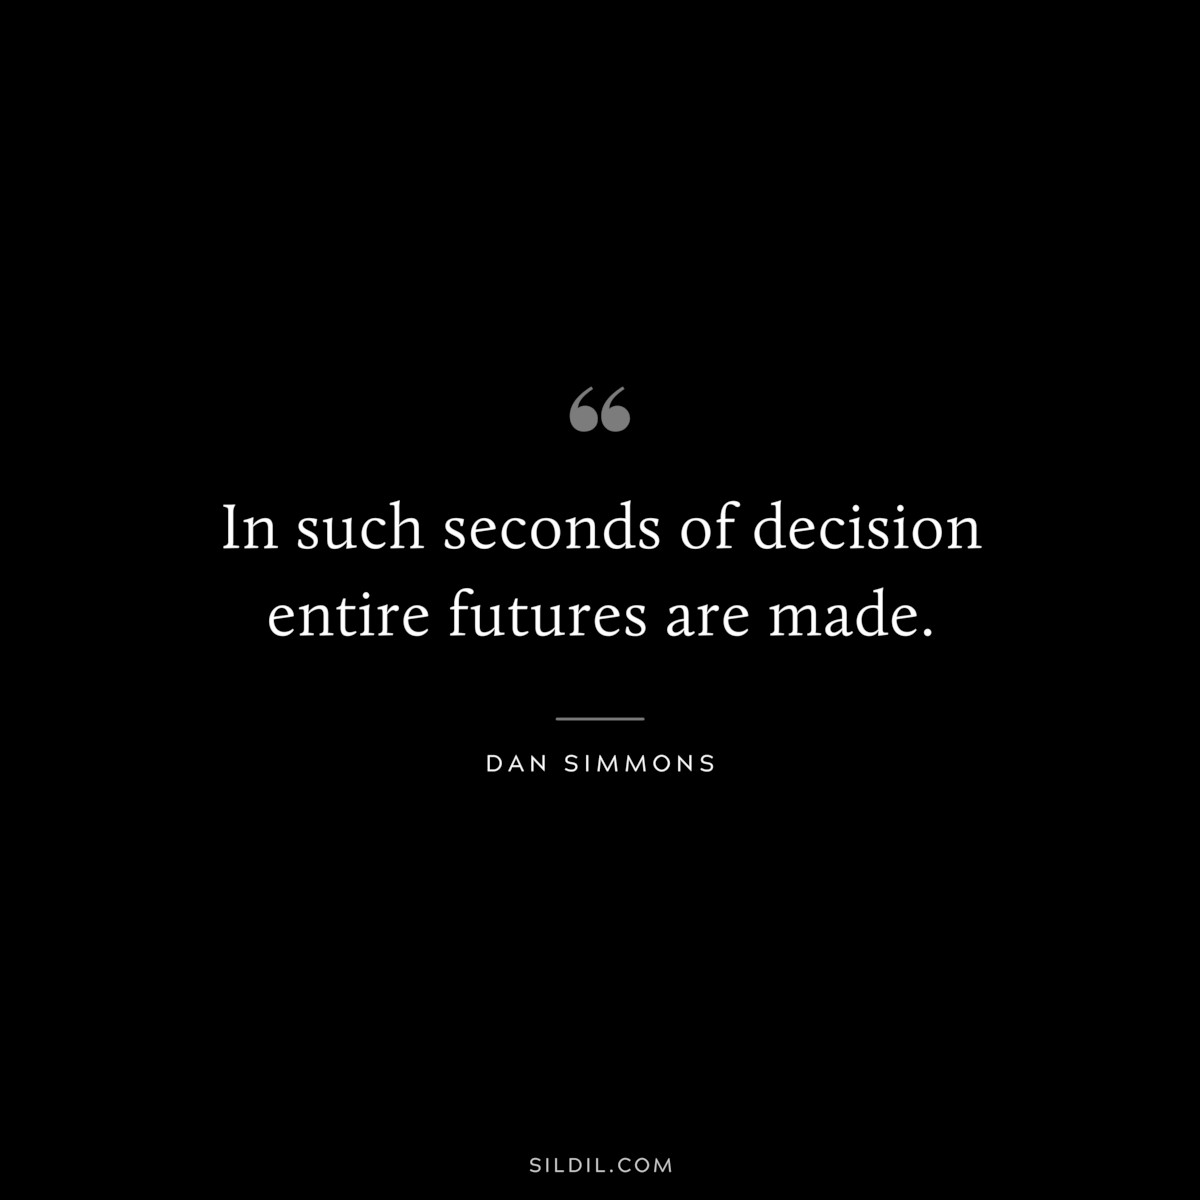 In such seconds of decision entire futures are made. ― Dan Simmons